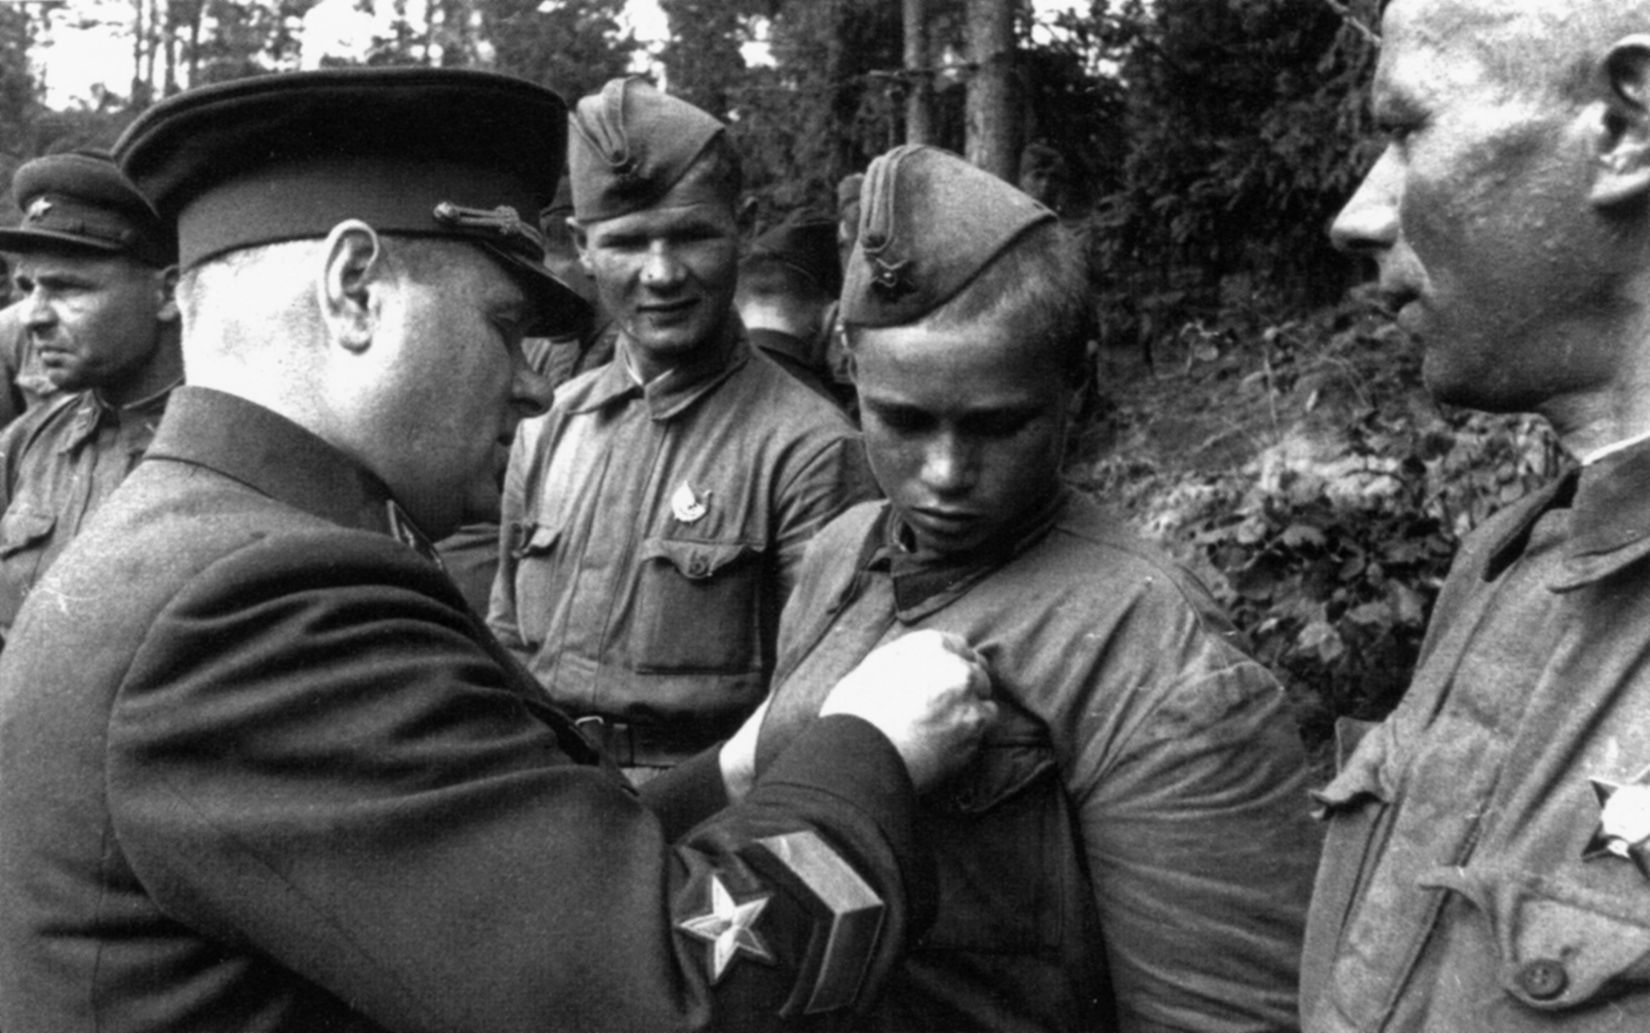 Red Army General Kirill Meretskov decorates a young Soviet soldier for heroism on the battlefield. The Soviets sacrificed thousands of troops in their effort to break the German ring around Leningrad. 